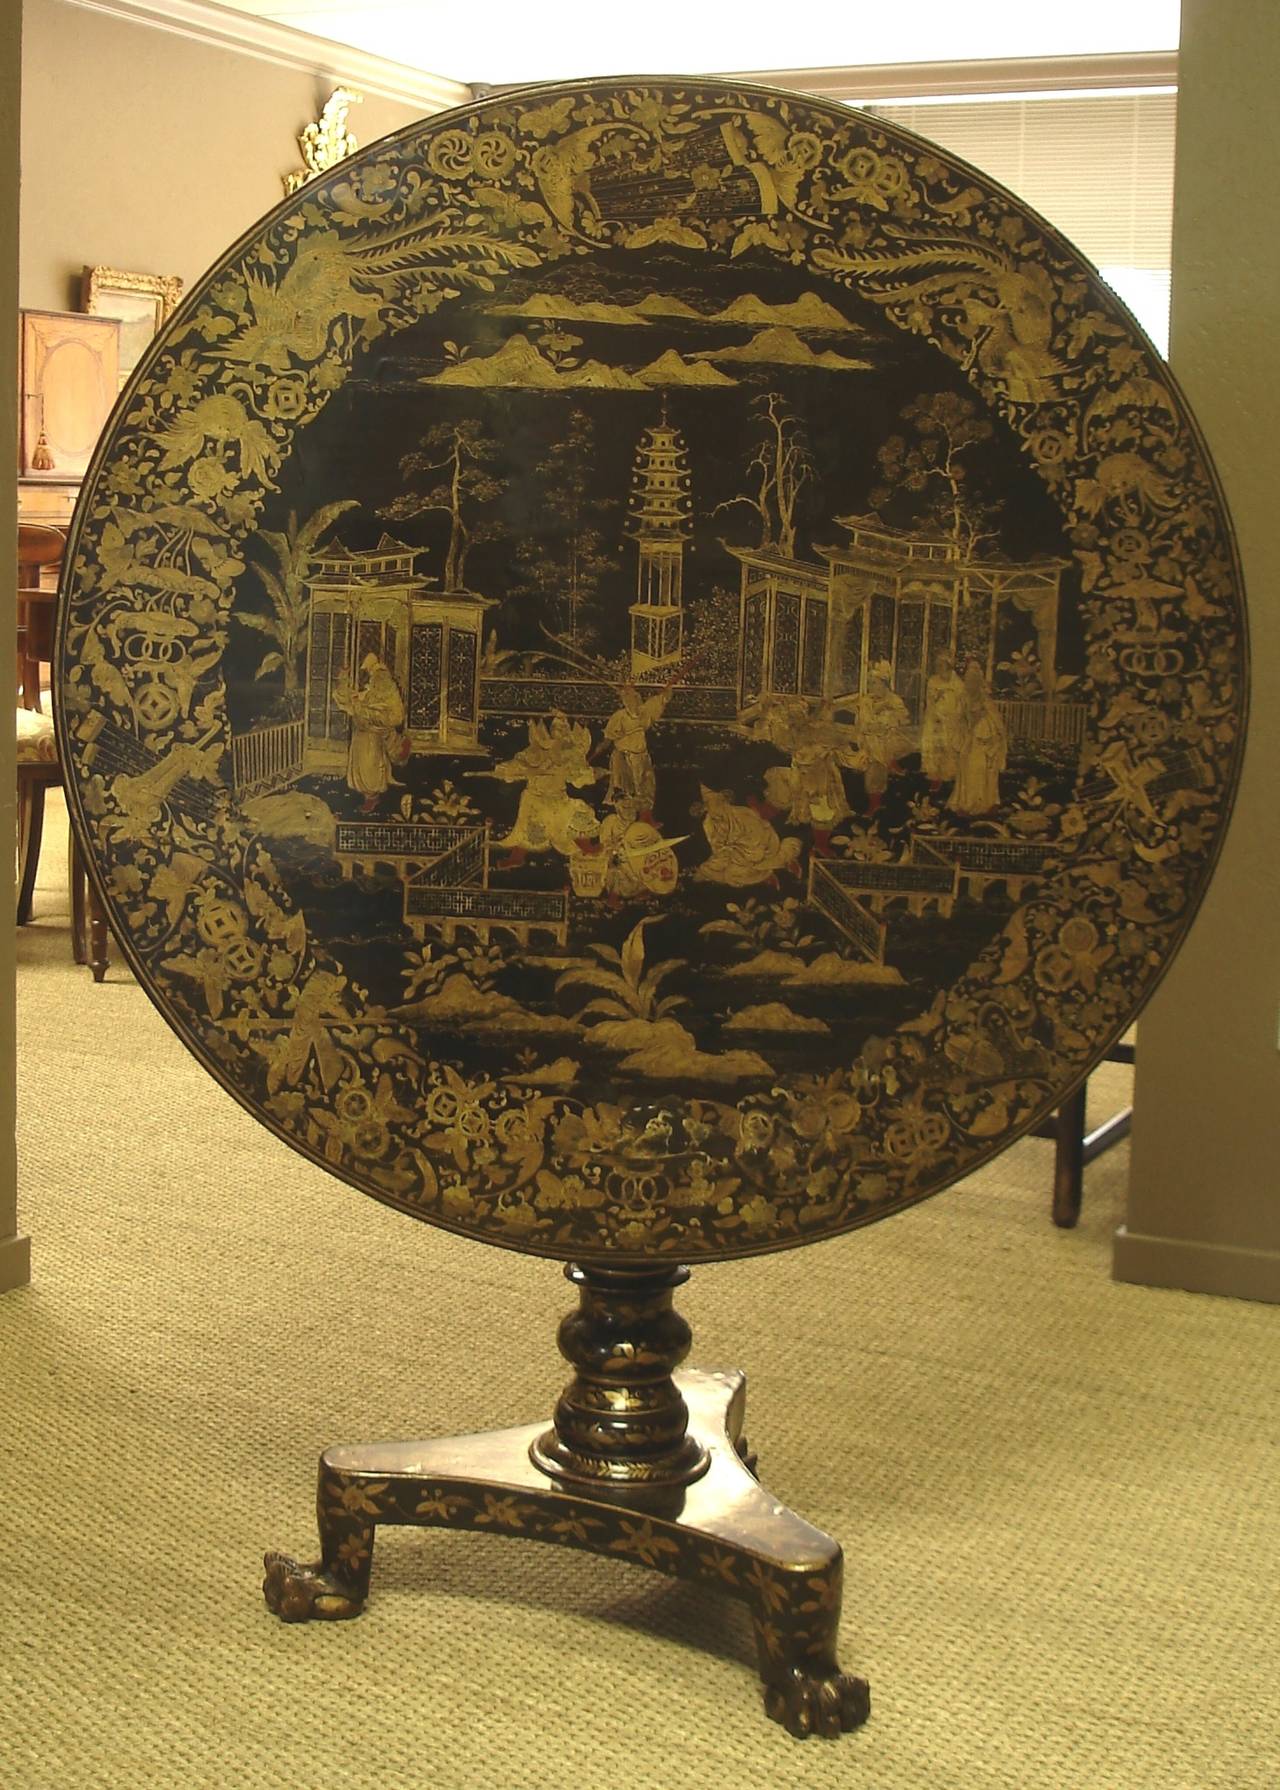 Chinese export lacquer and gilt decorated tilt-top table. The circular top decorated with figures engaged in courtly activities within a foliate border. The top above a birdcage action, with gilt decorated pedestal and tripod legs with ball and claw